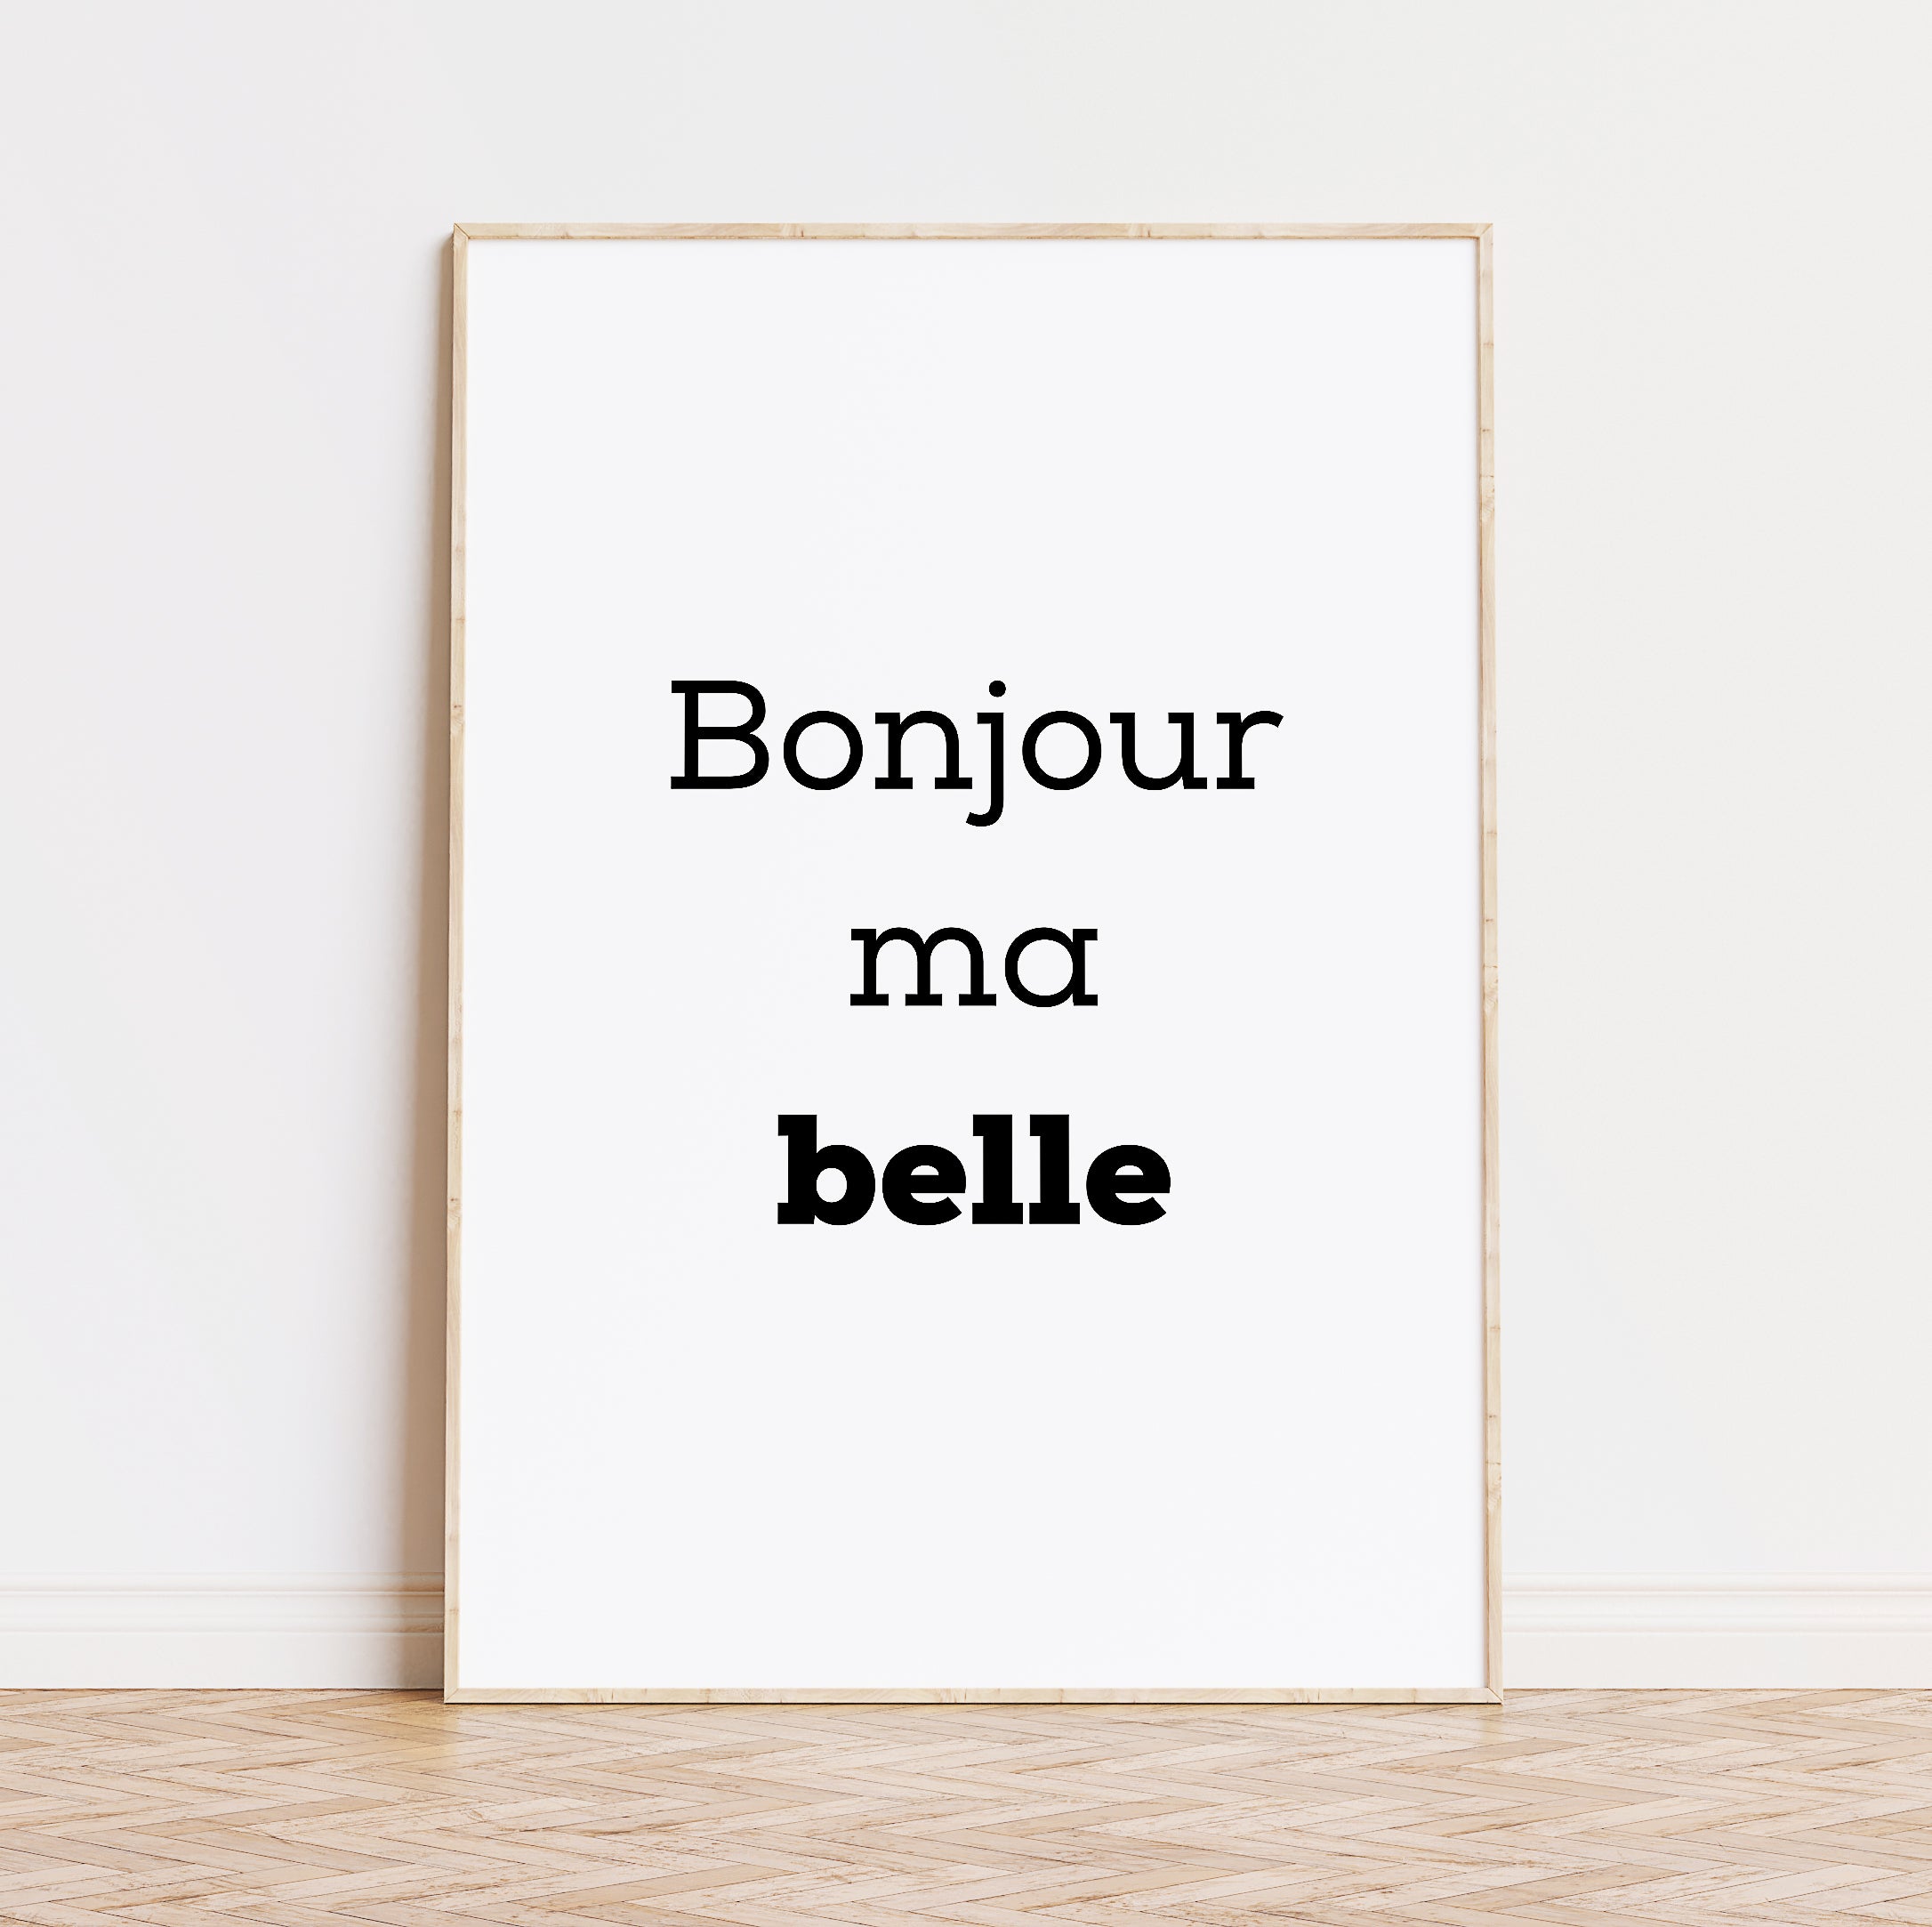 – studio5prints belle, Print, Bonjour French Poster Typographic Statement, ma